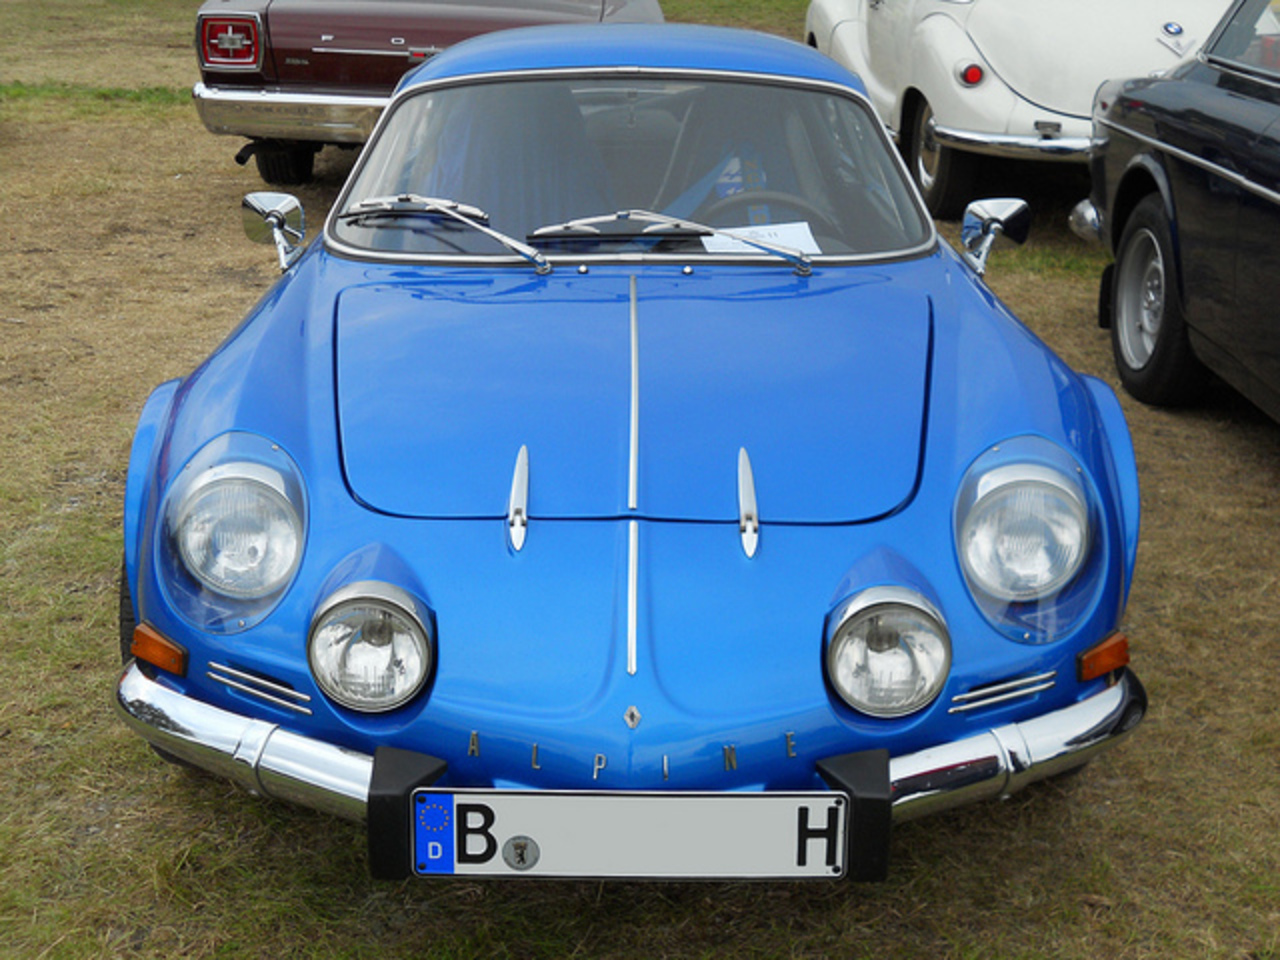 Alpine A 110 1800 Gr IV Photo Gallery: Photo #06 out of 10, Image ...